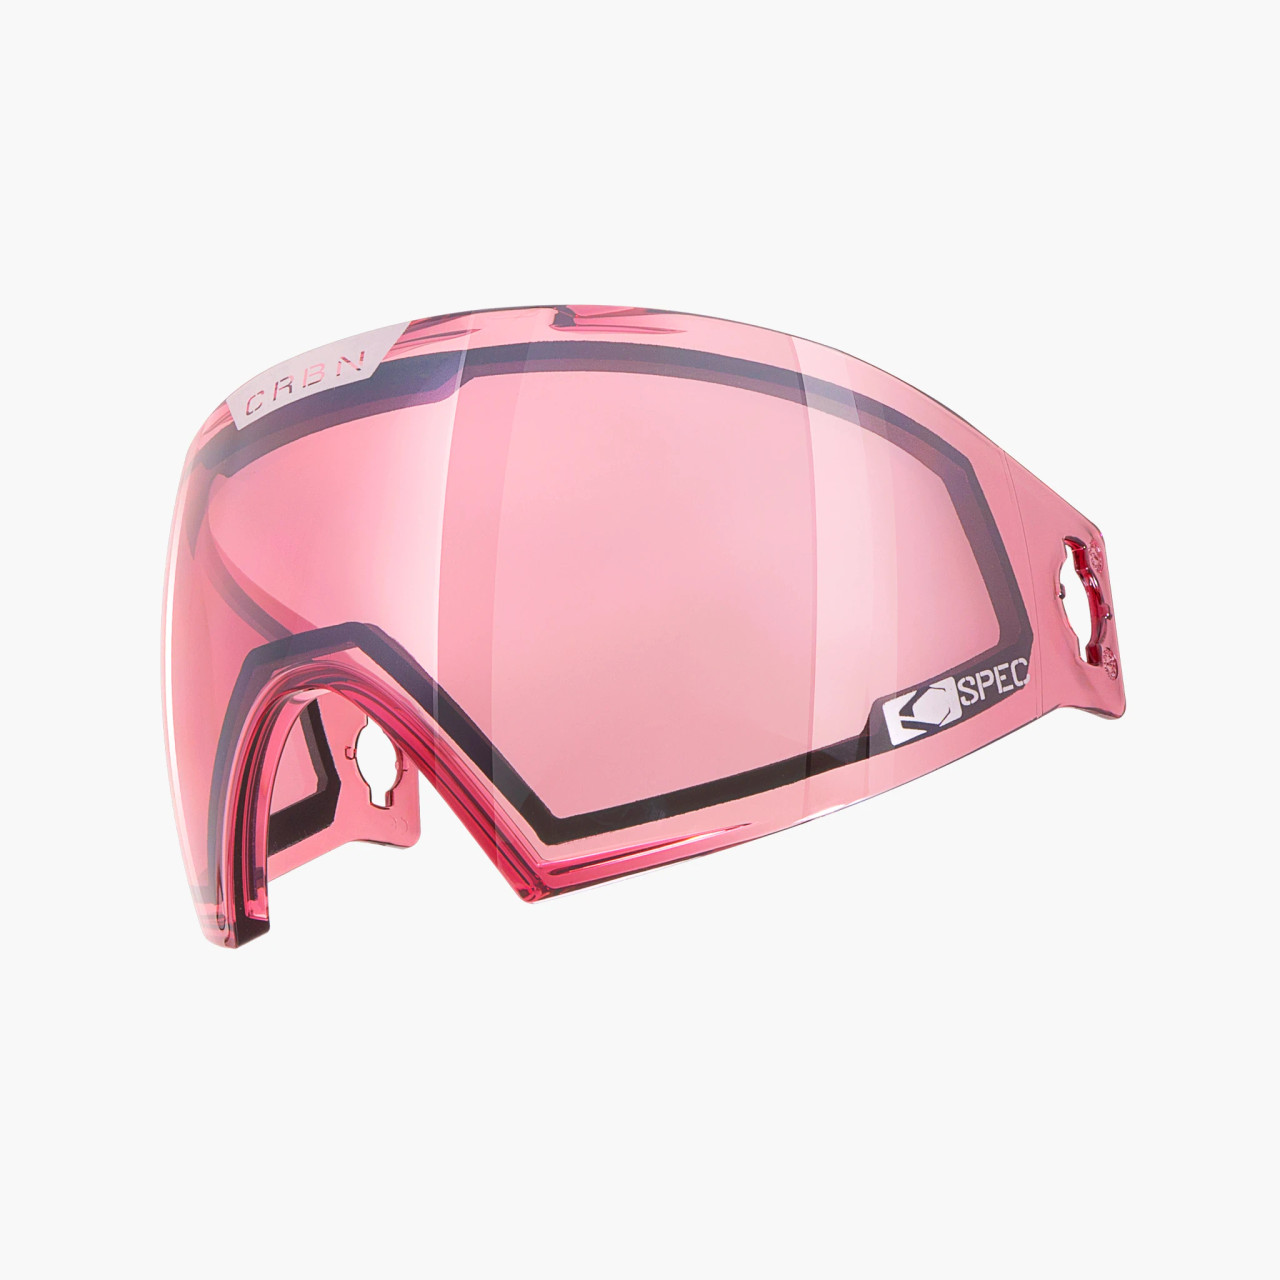 CRBN - C-Spec - Performance Lens - Rose - Clear Mirror